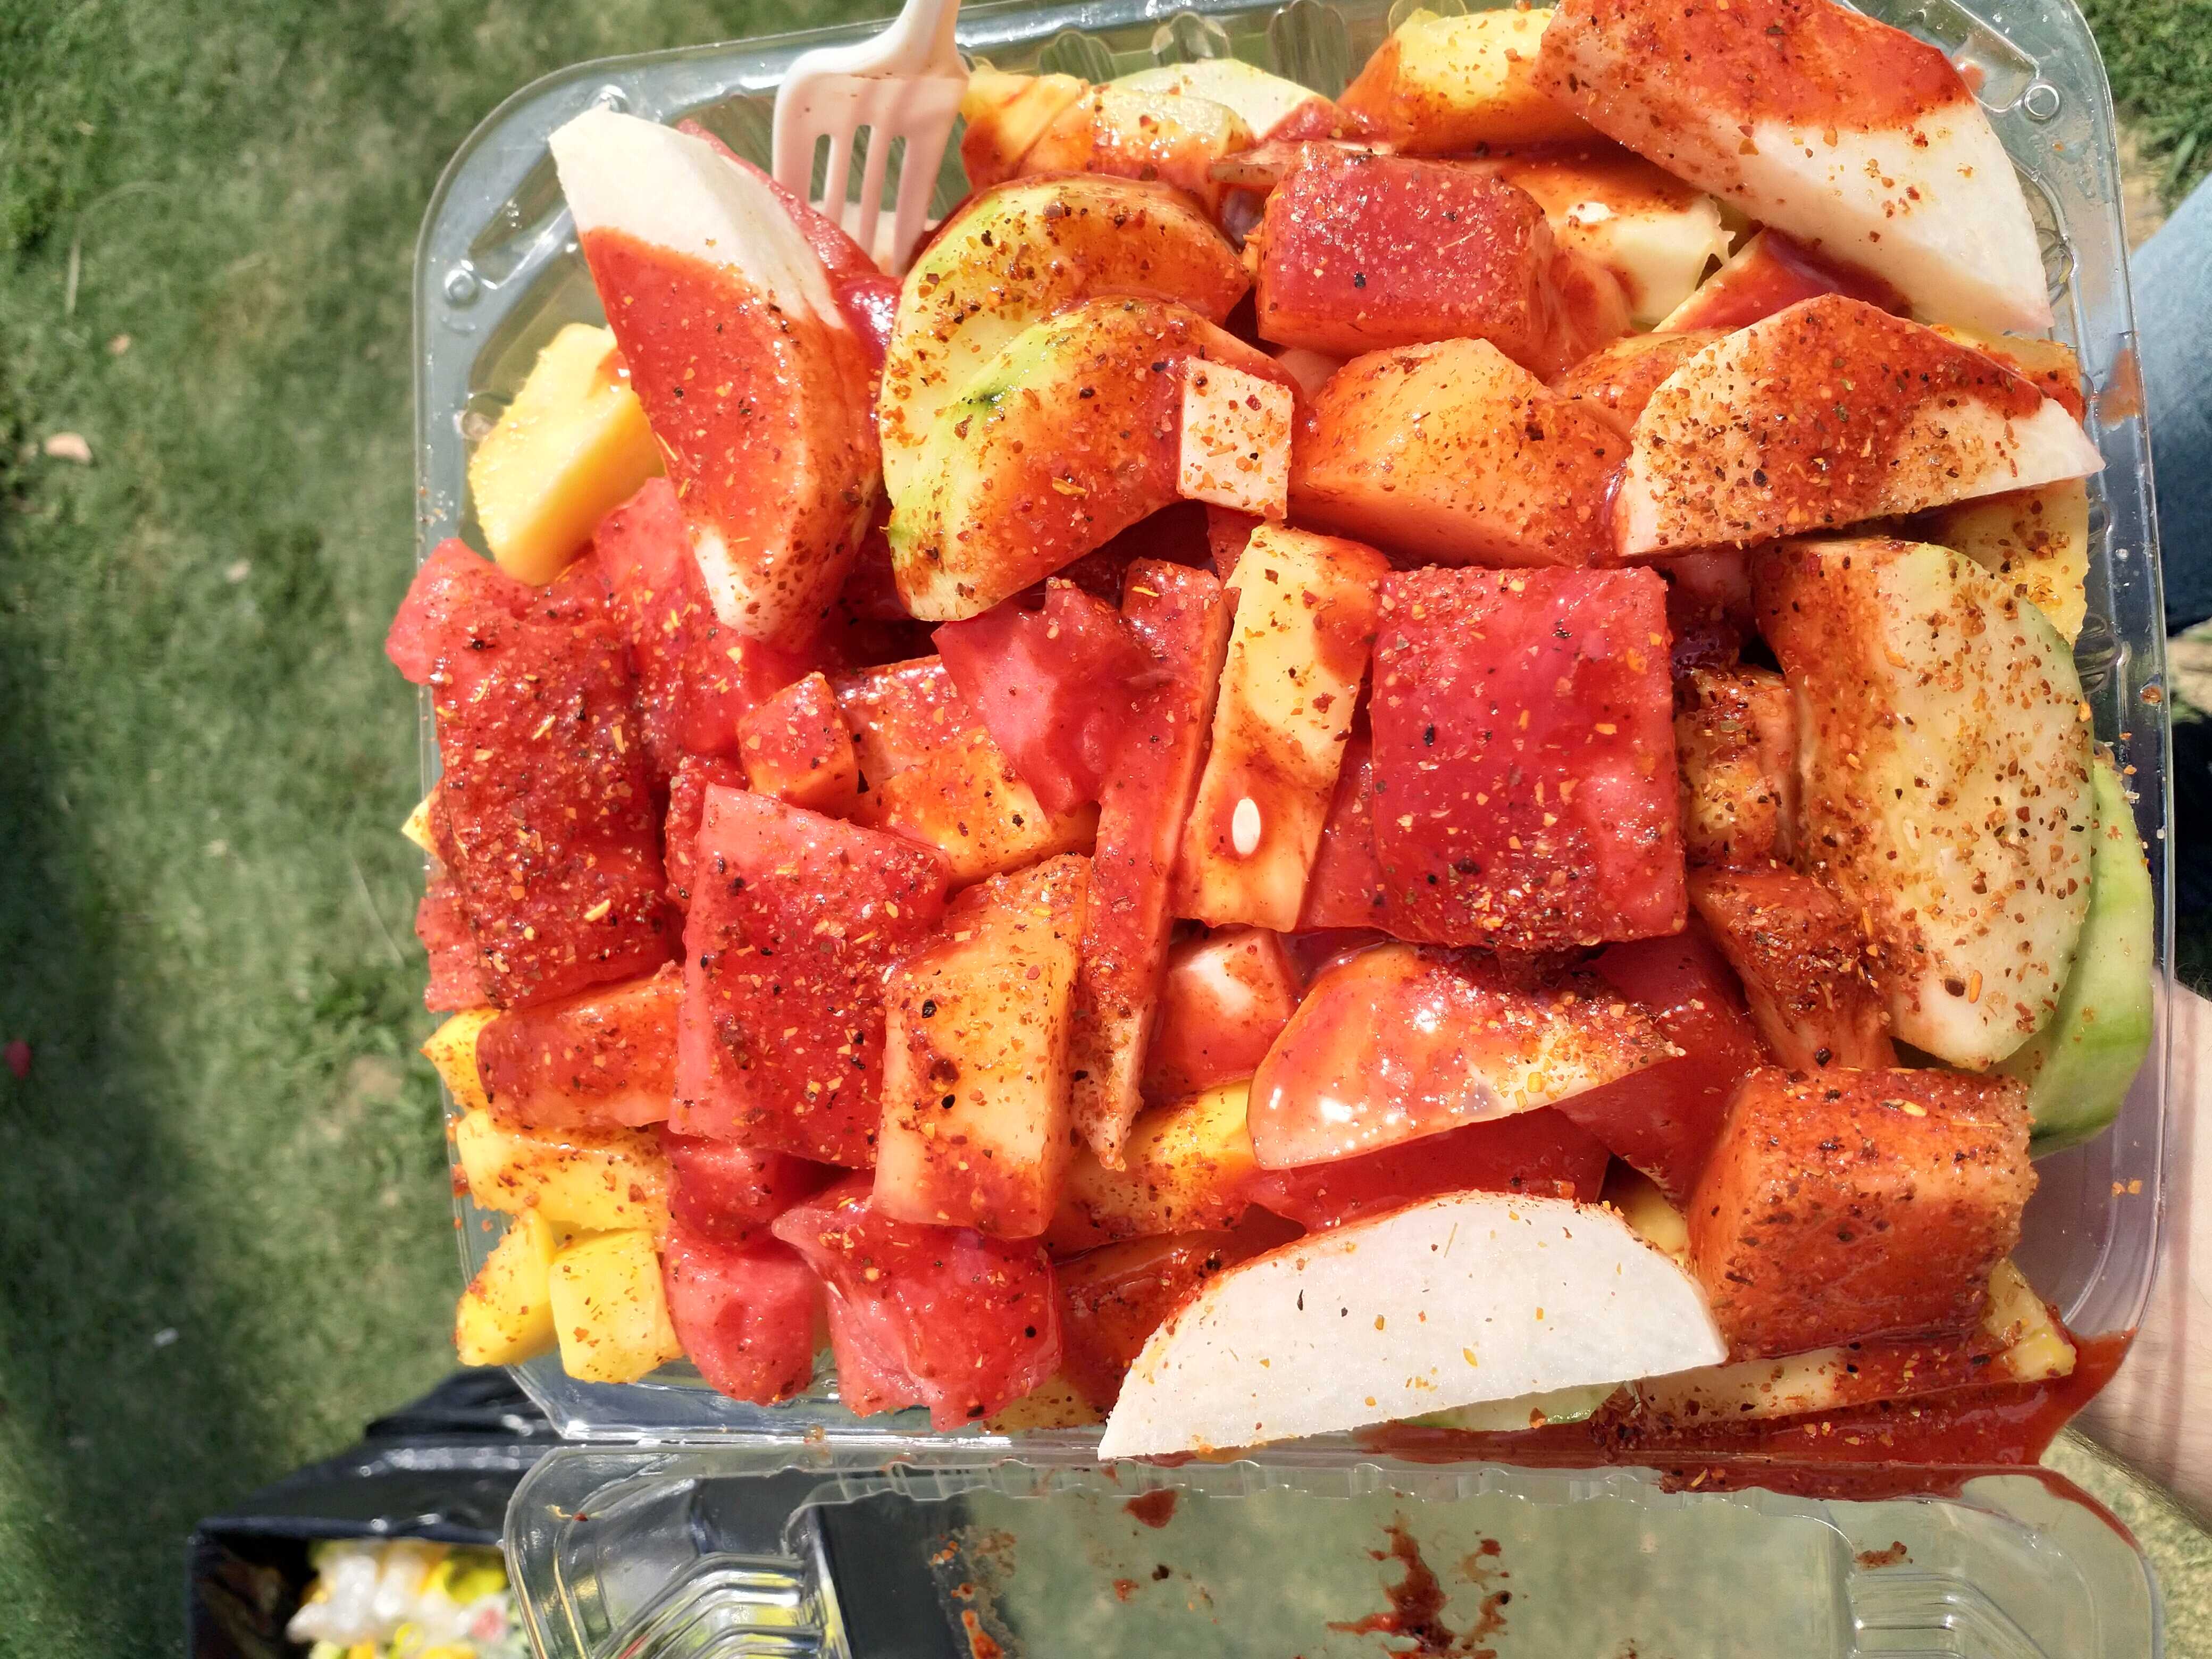 A typical fruit salad served by one of the many street vendors in Southern California.